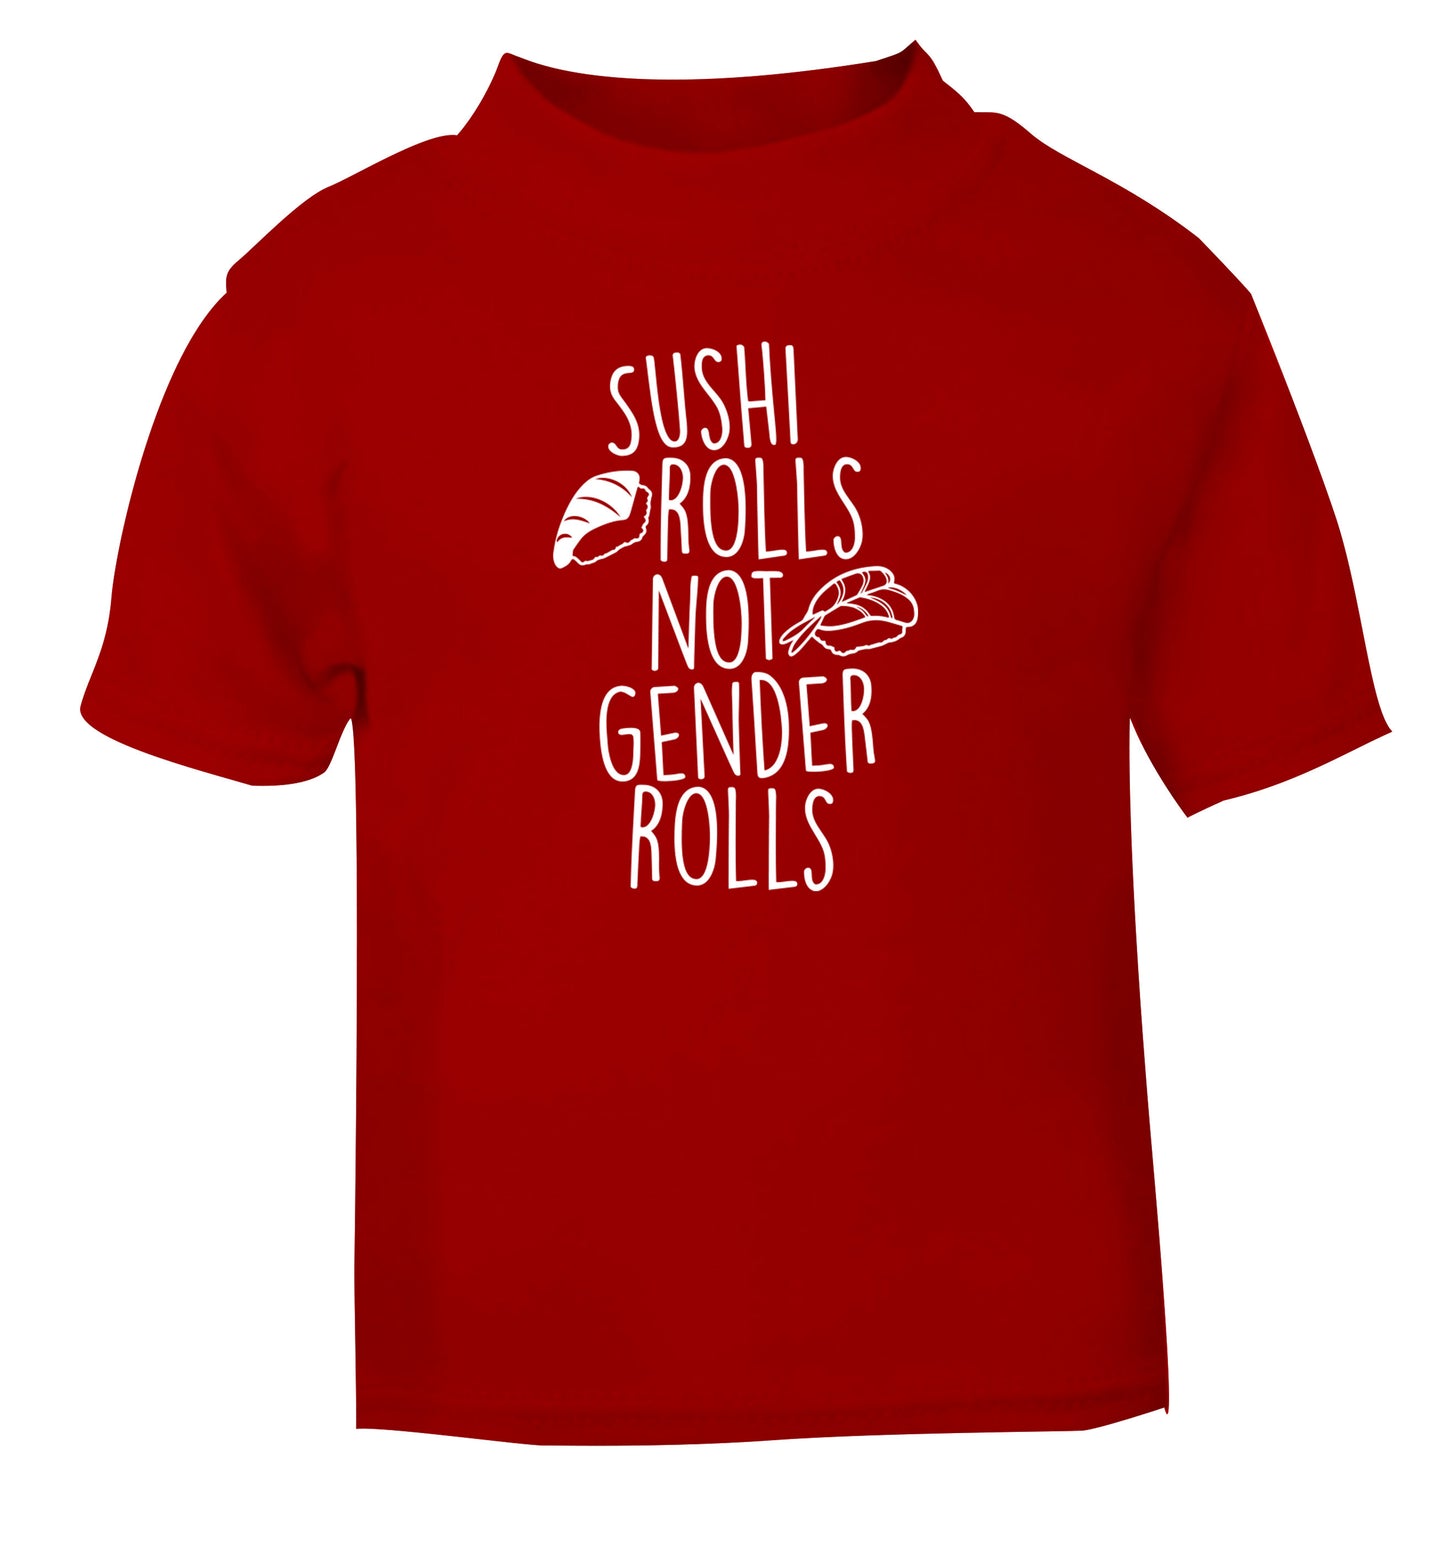 Sushi rolls not gender rolls red Baby Toddler Tshirt 2 Years